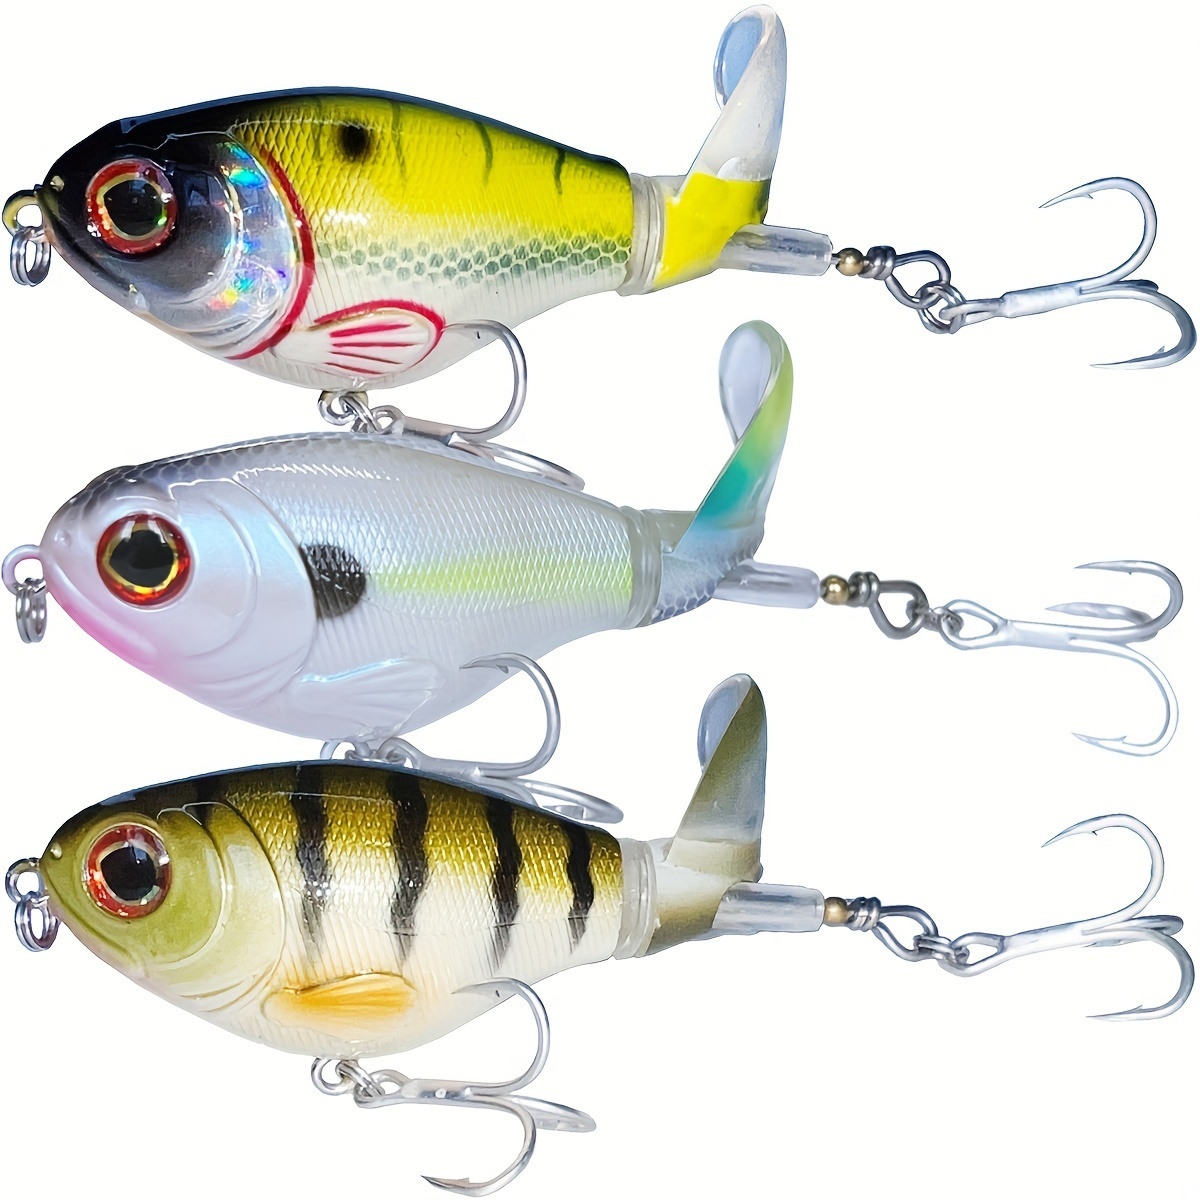 

Catch More Fish With Bkk Hooks, Floating Propeller Tail Teasers & Pencil Ploppers - Topwater Fishing Lures!